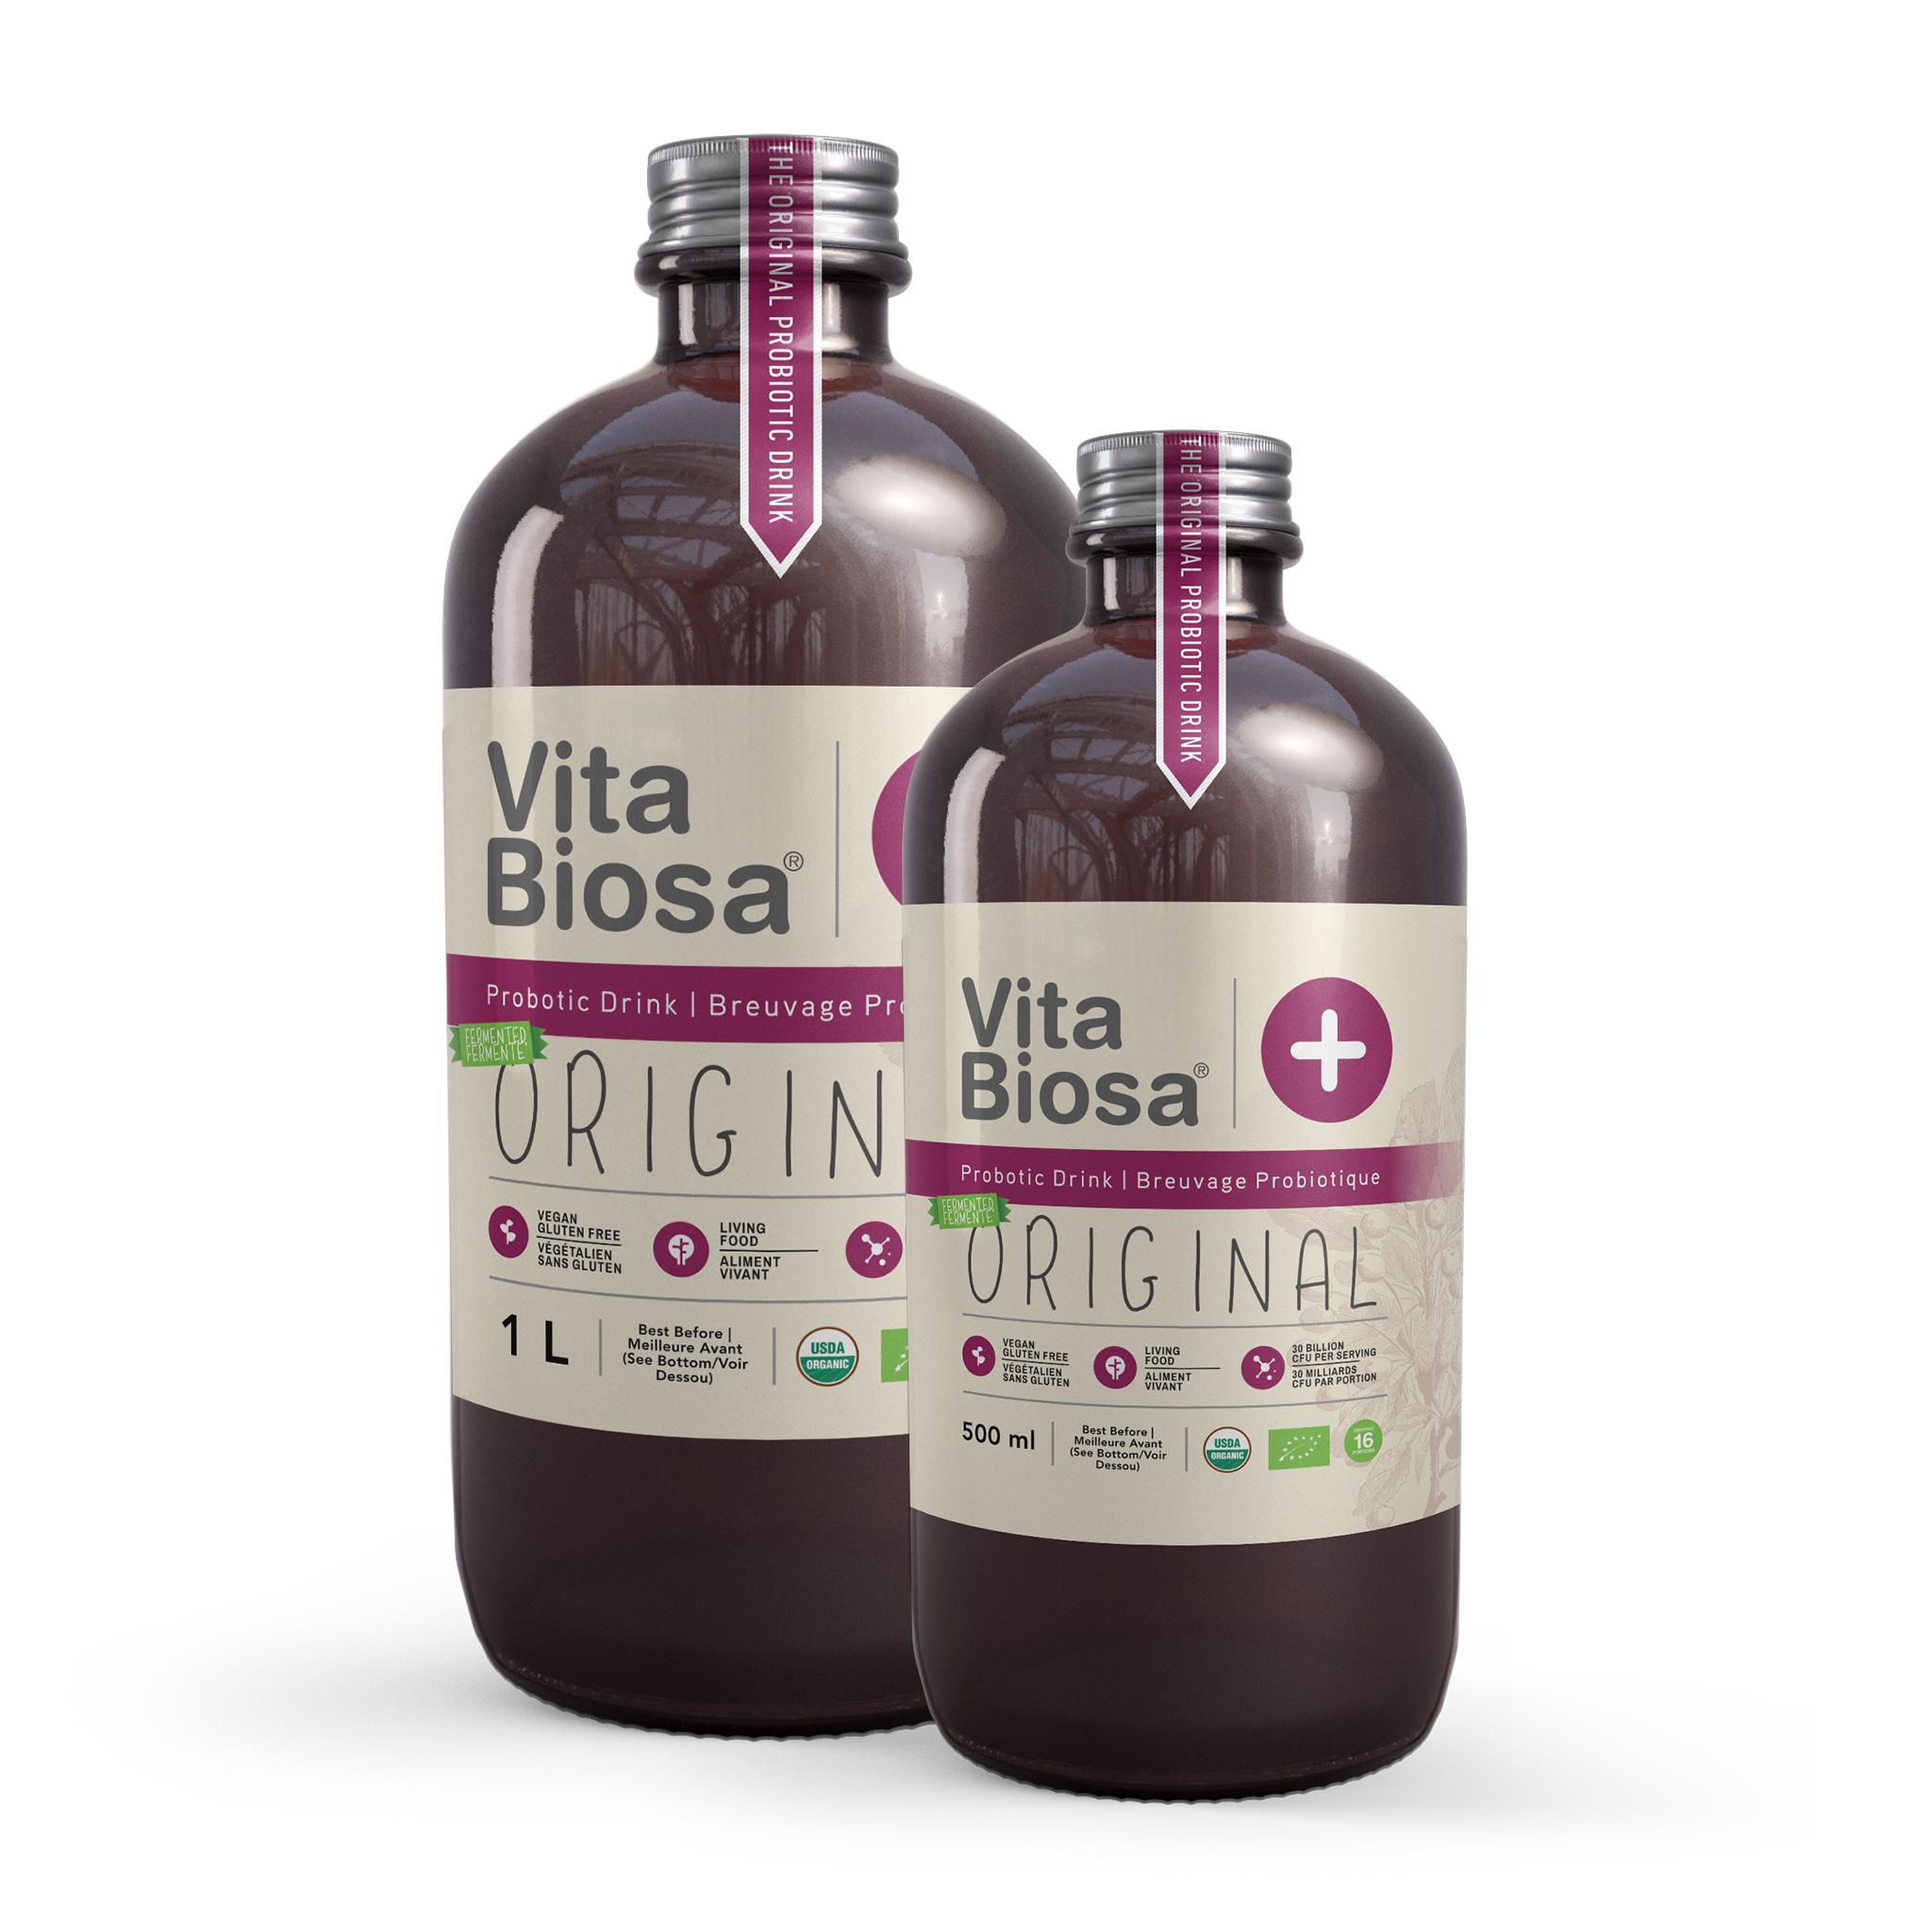 Vita Biosa - The #1 Probiotic Choice and the Why behind the Beneficial Chosen Strains